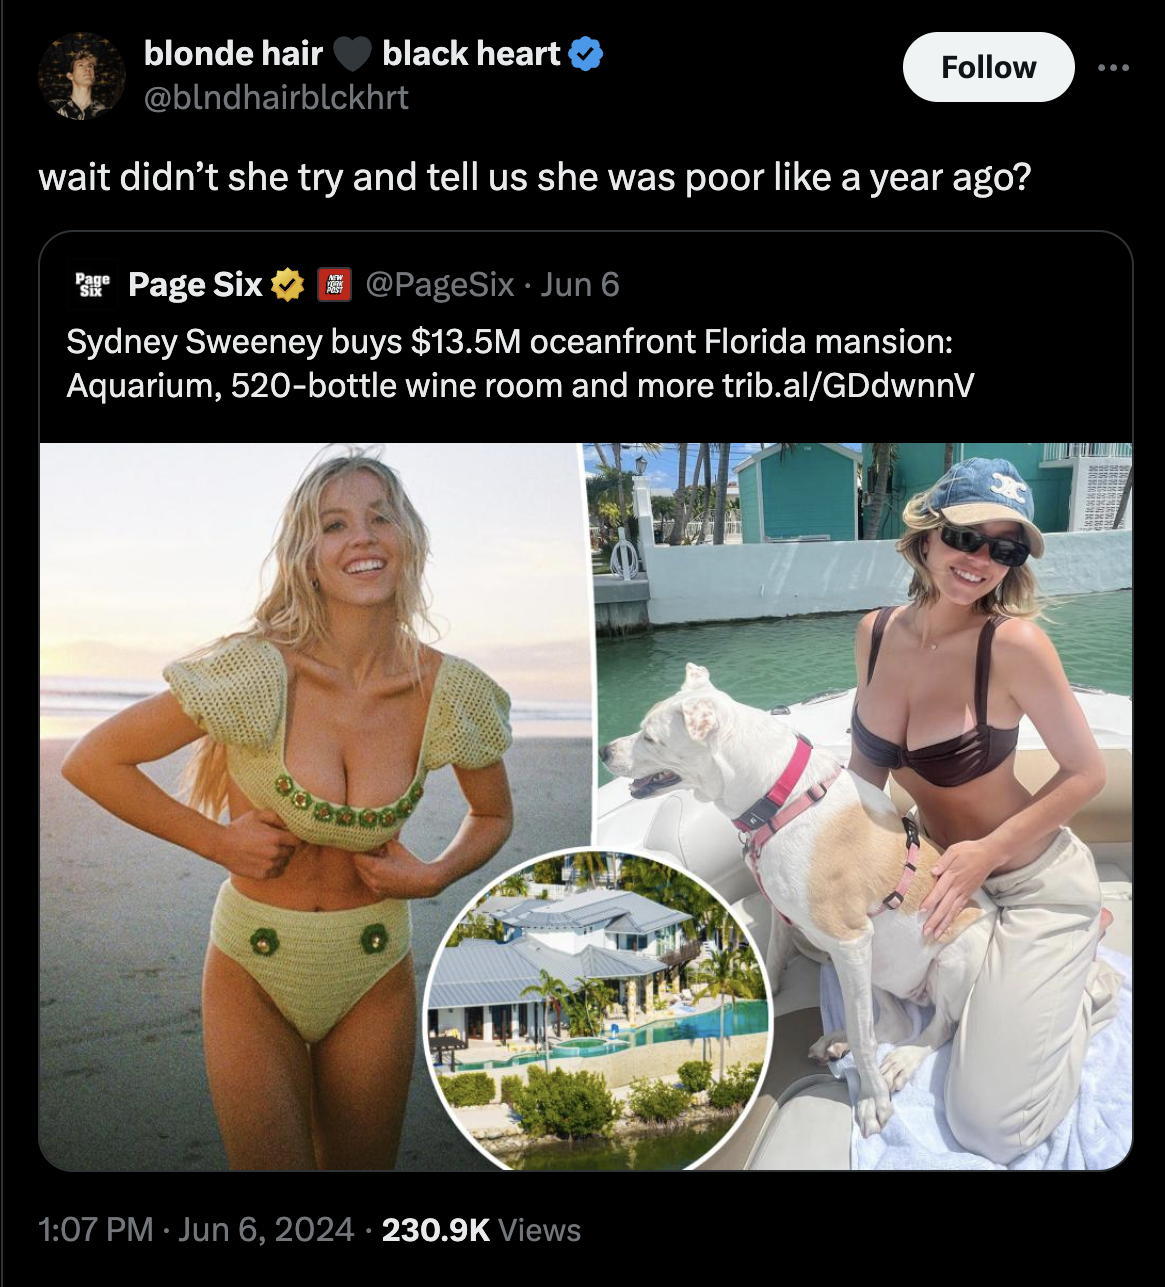 swimsuit top - blonde hair black heart wait didn't she try and tell us she was poor a year ago? Page Six Jun 6 Sydney Sweeney buys $13.5M oceanfront Florida mansion Aquarium, 520bottle wine room and more trib.alGDdwnnV Views